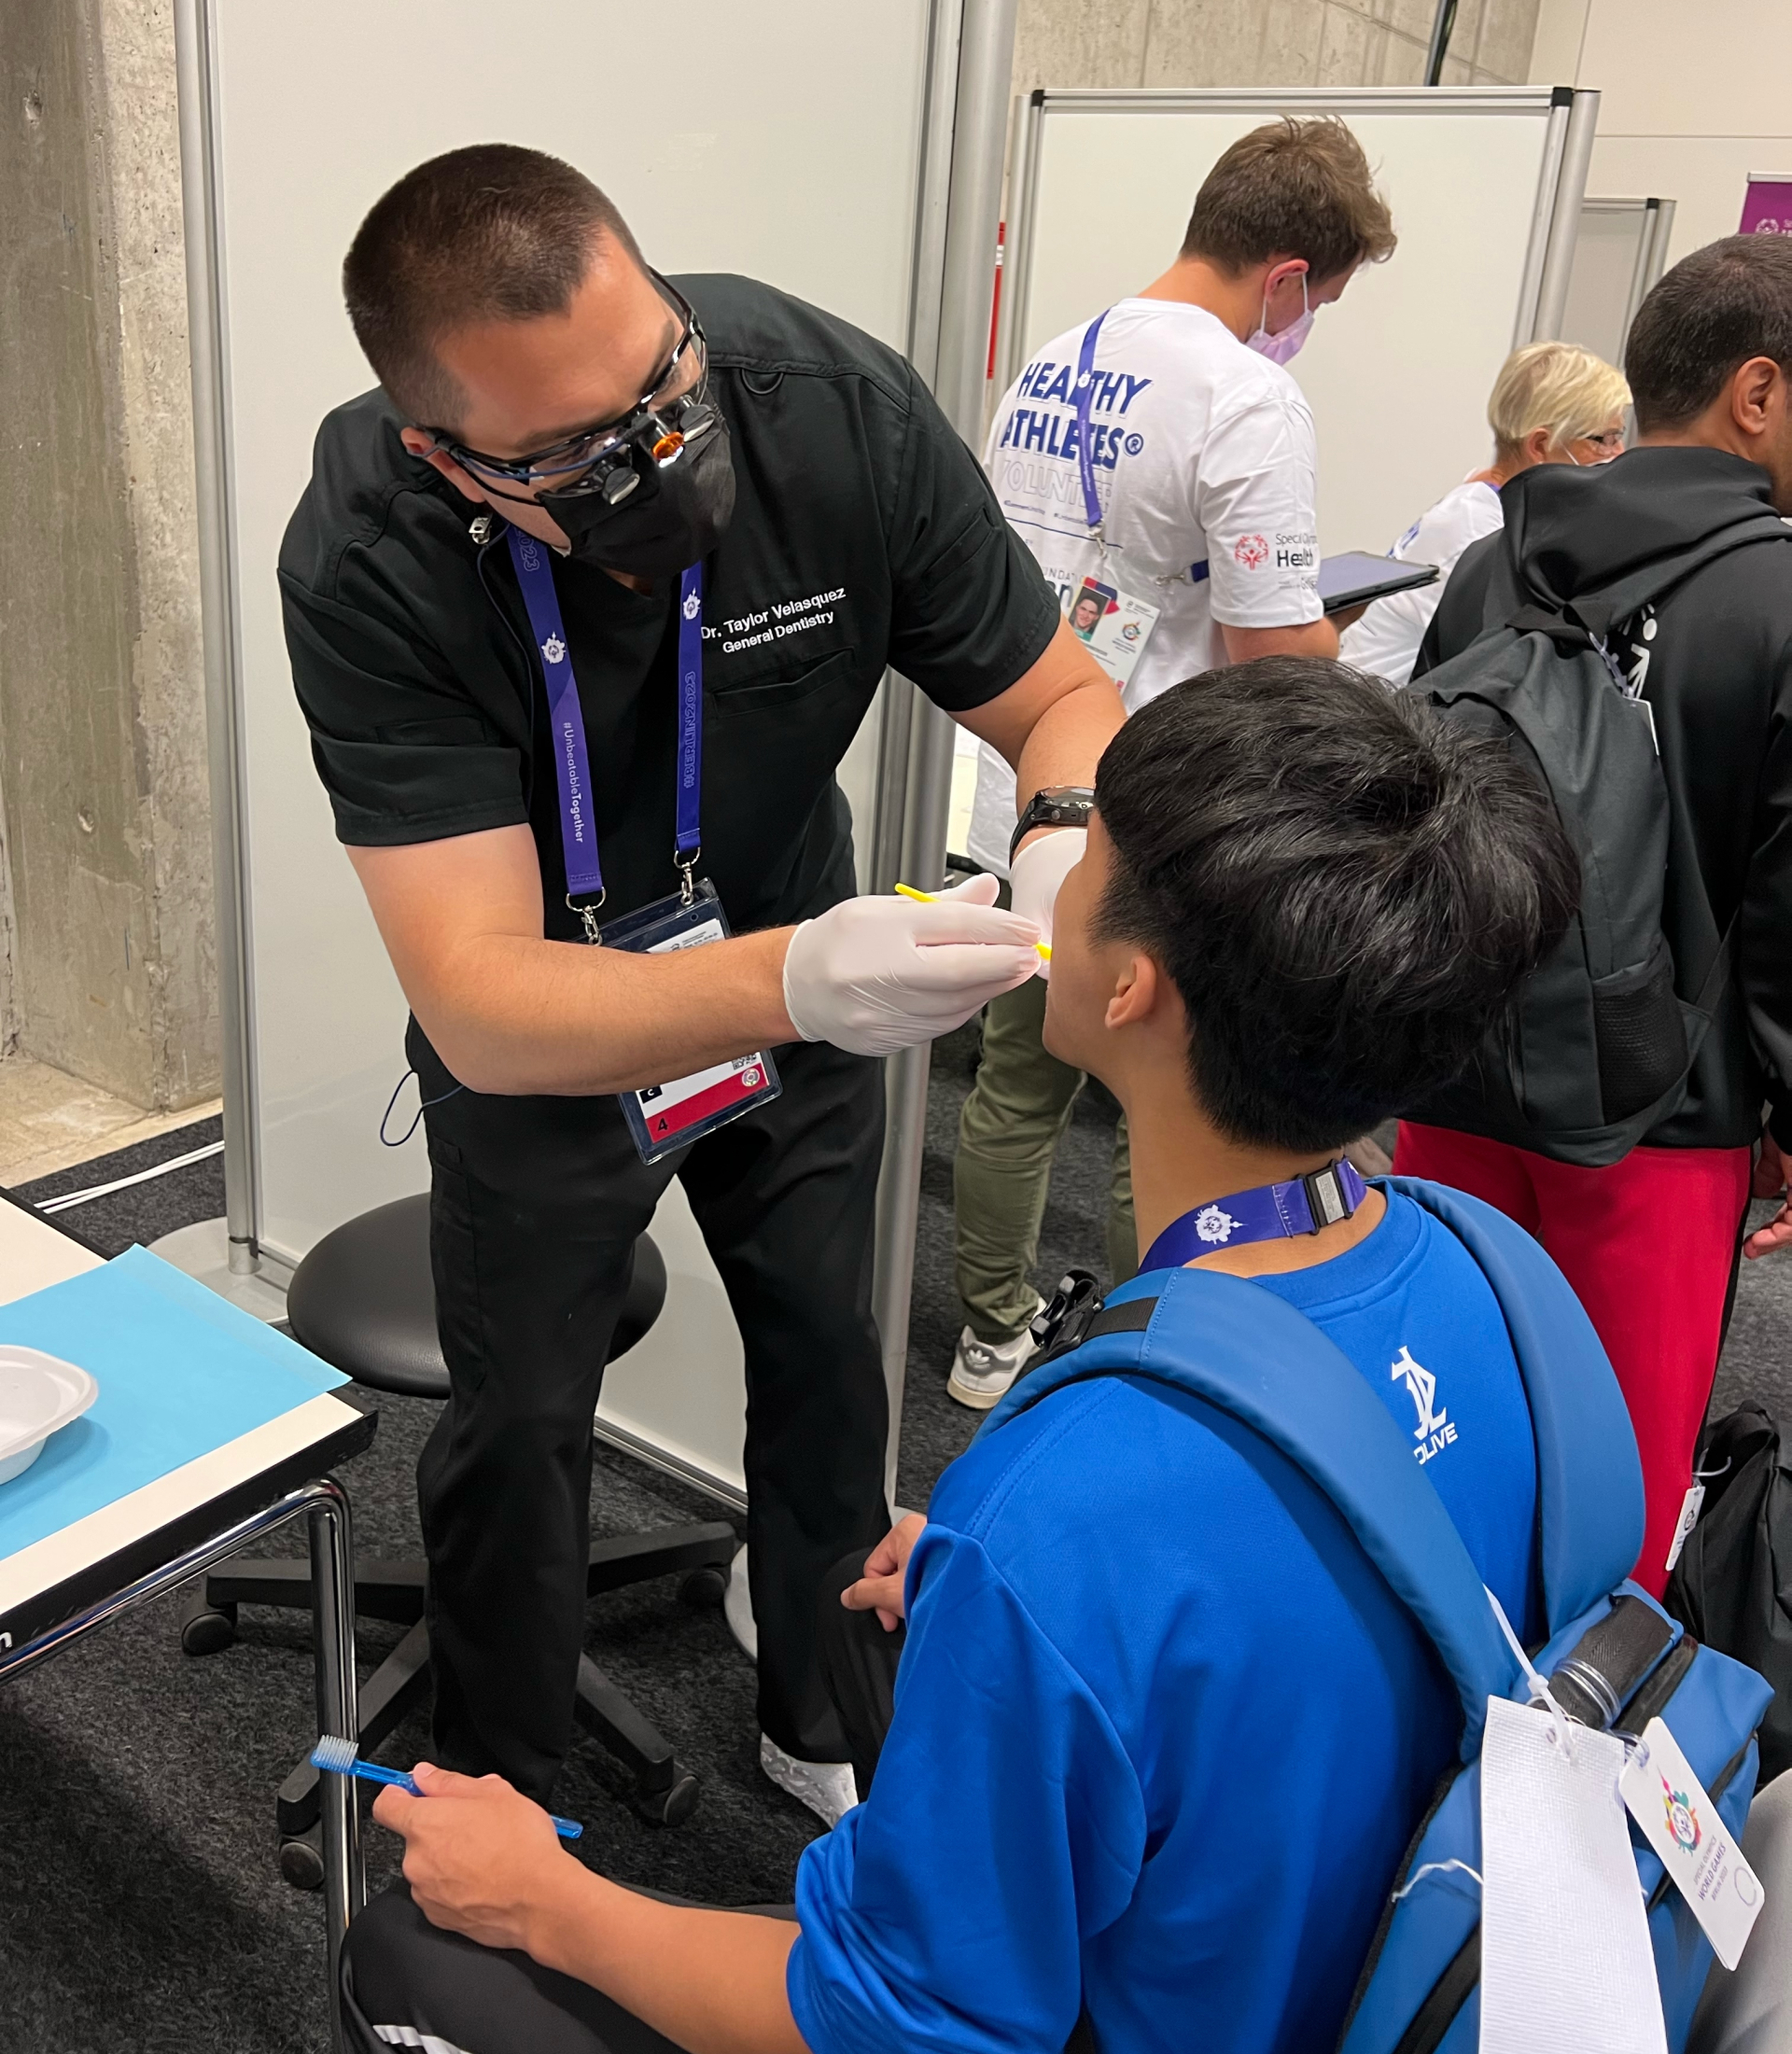 Dr. Taylor Velasquez screens patient athletes at the Special Olympics World Games.